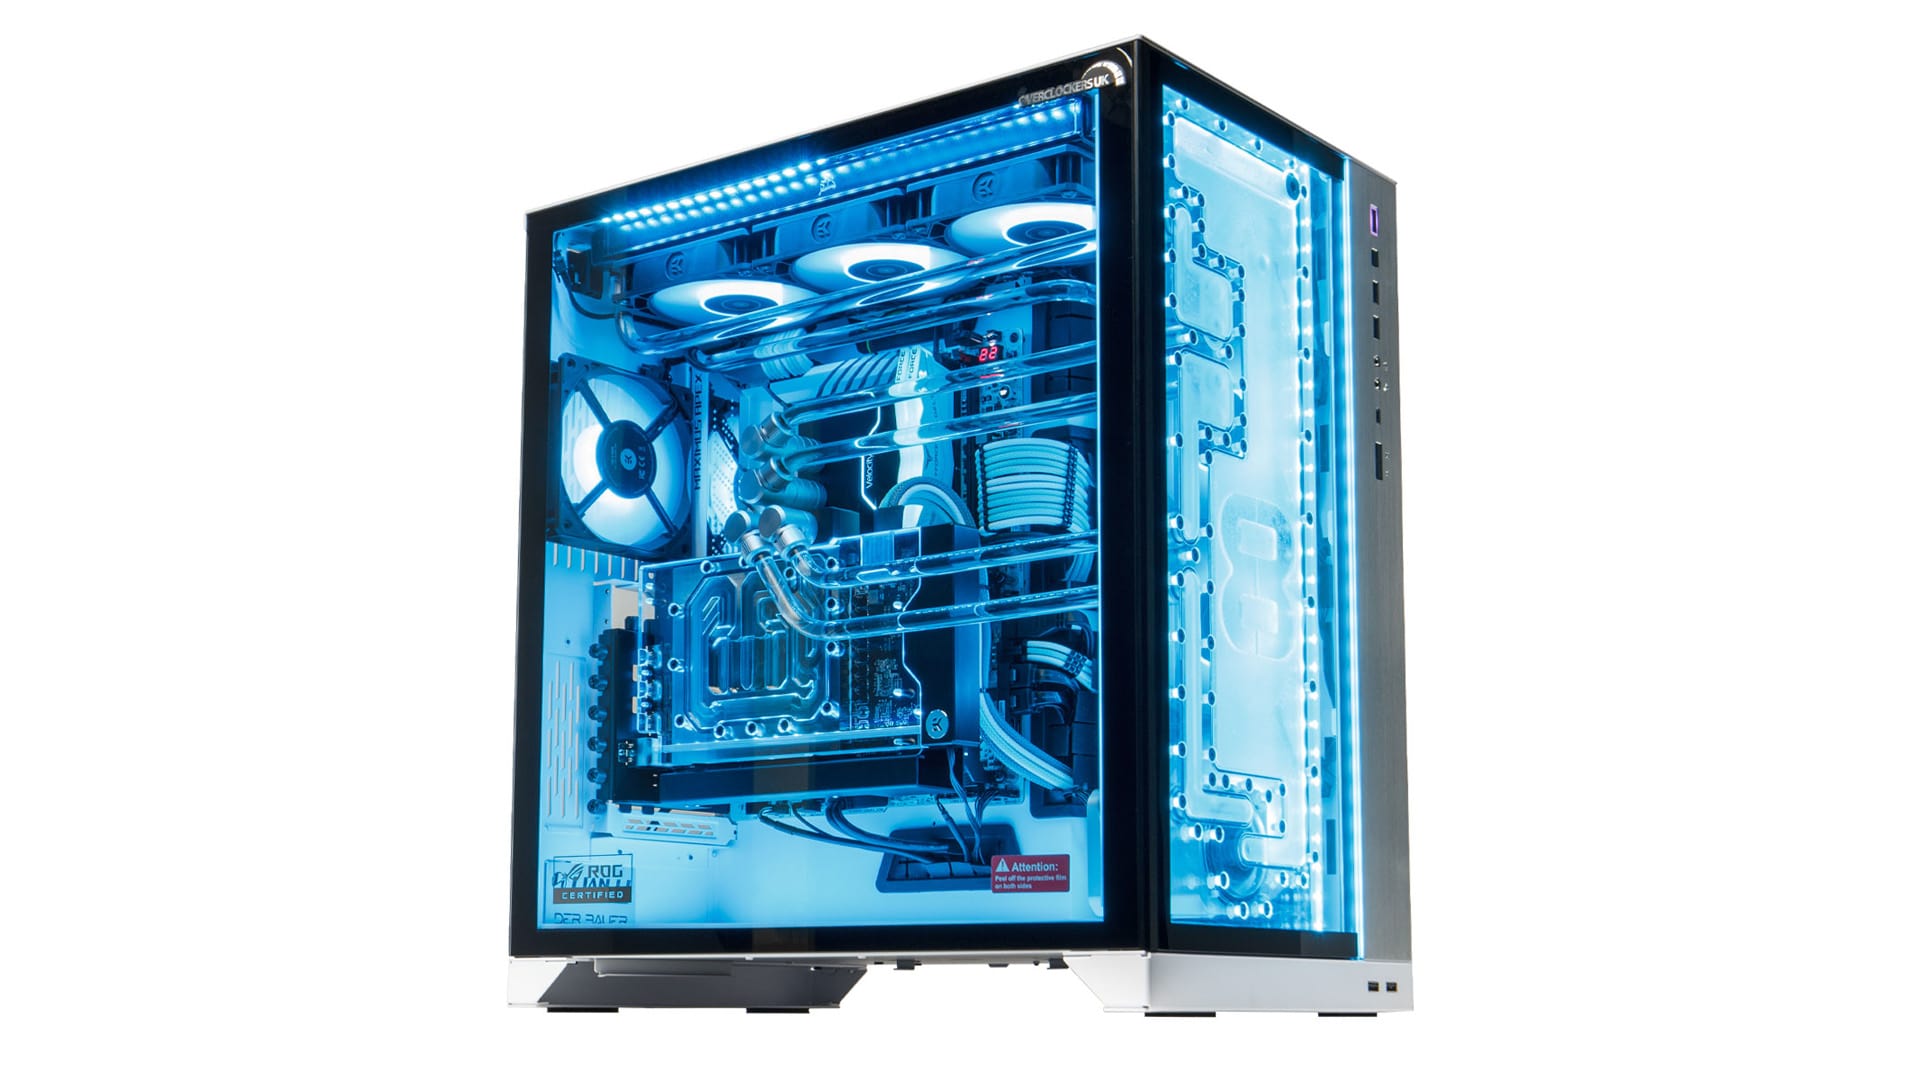 Gaming PC featuring Intel Core i9 processor and AMD Ryzen ideal for PC gaming